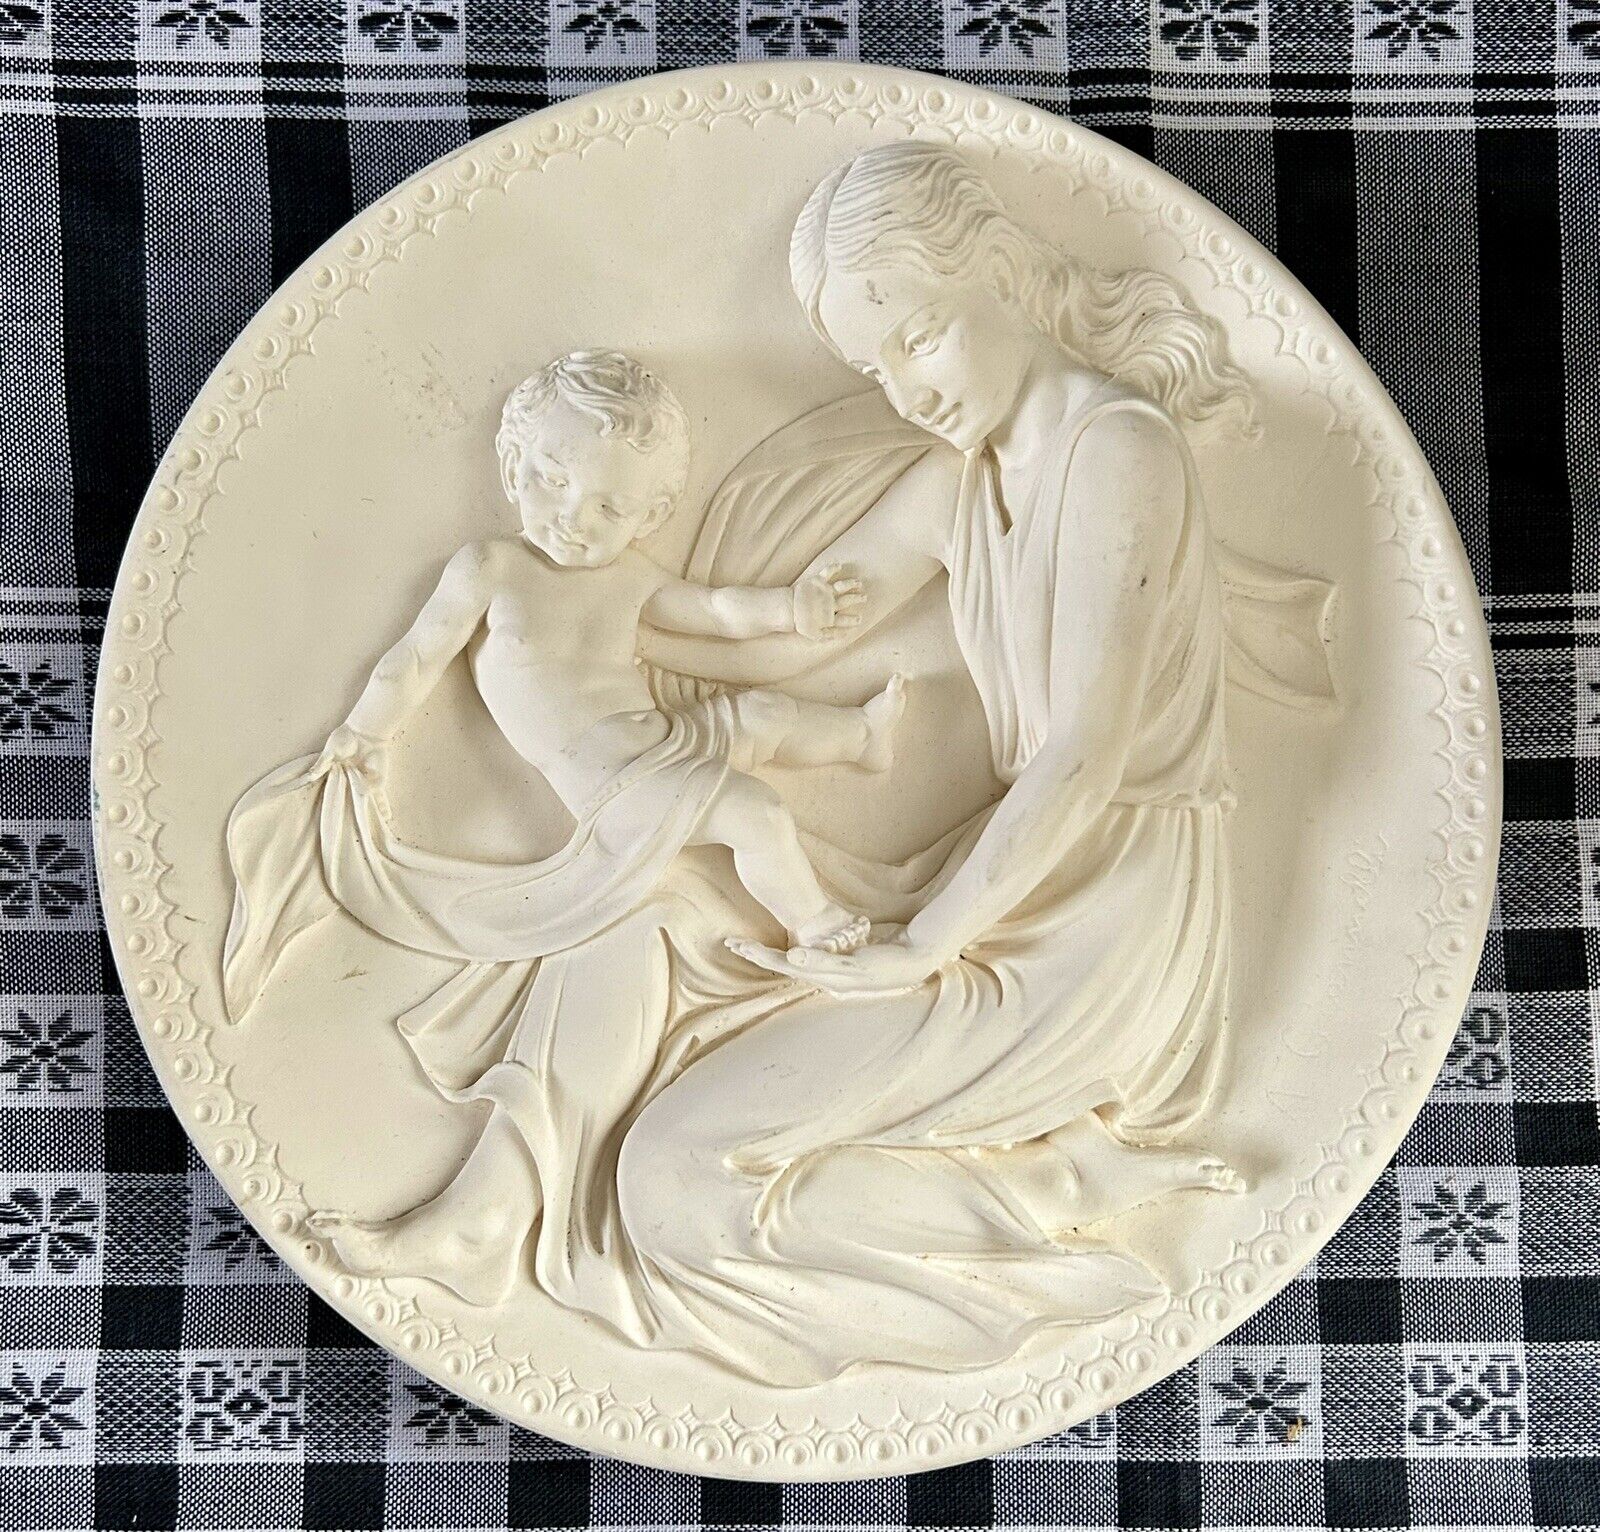 Arnaldo  Giannelli-Italy Plaque 1979 Humility Mirrors Of Motherhood 9” wide